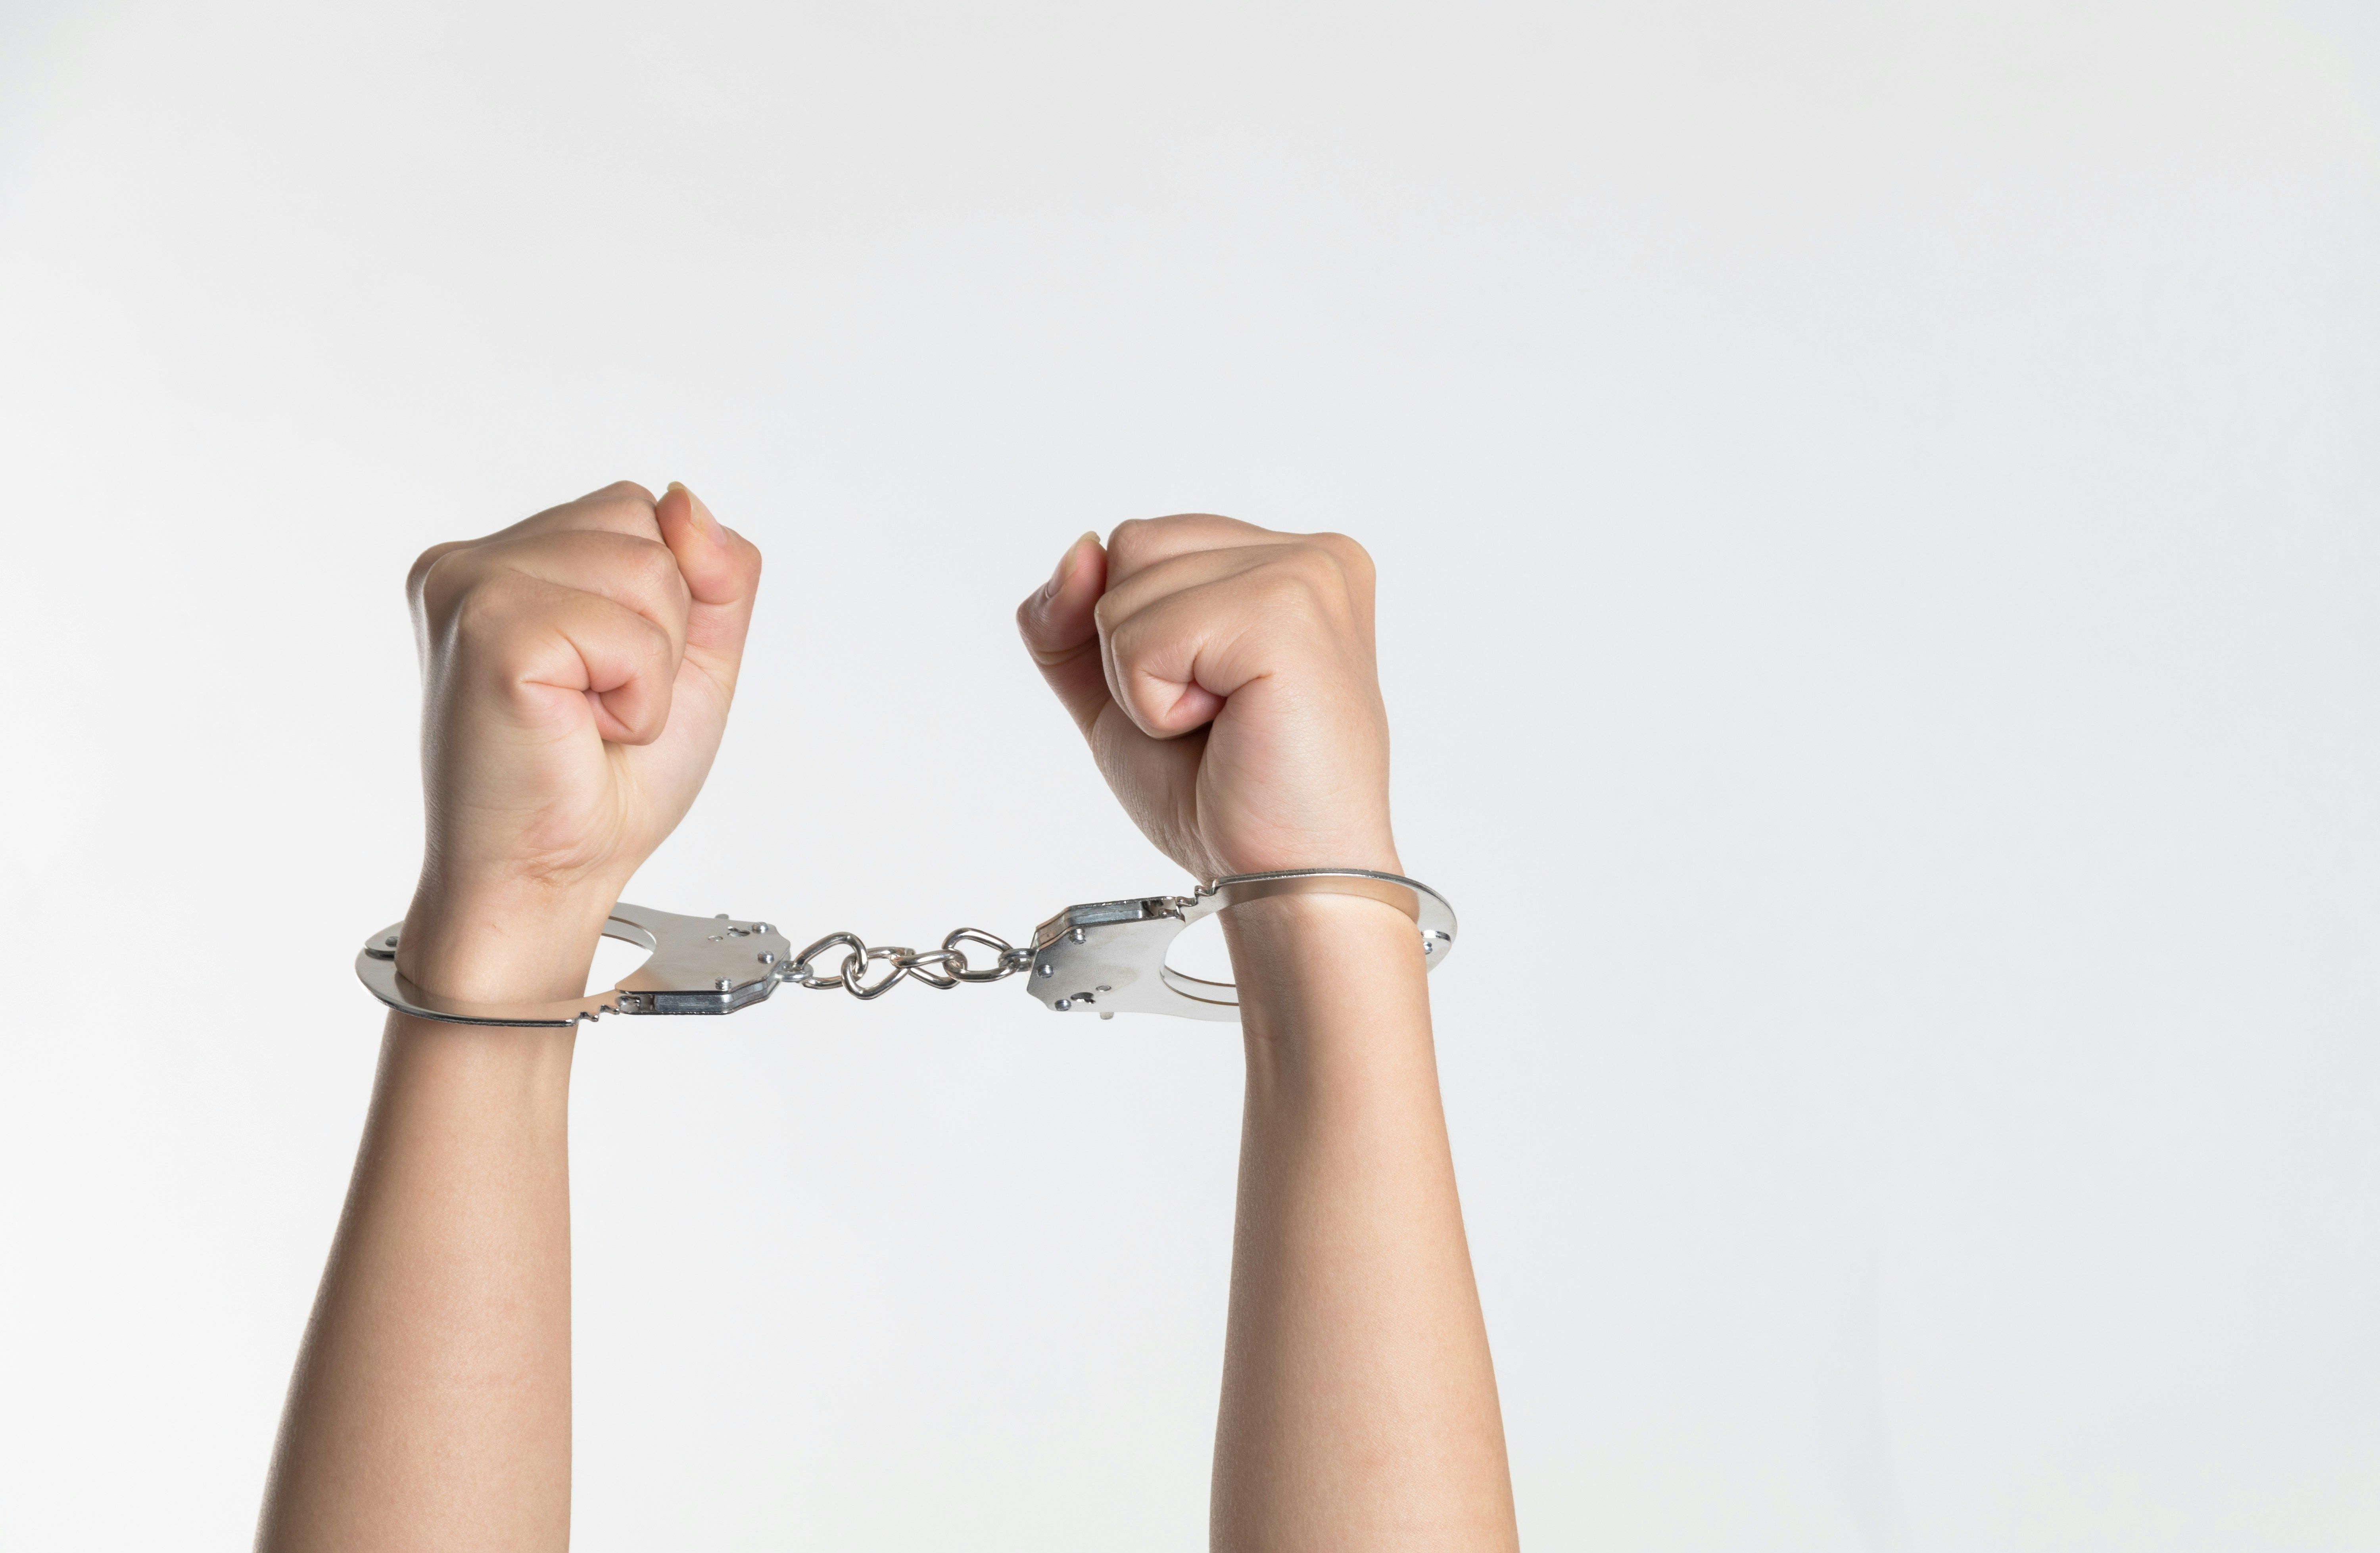 A person in handcuffs showing their arms